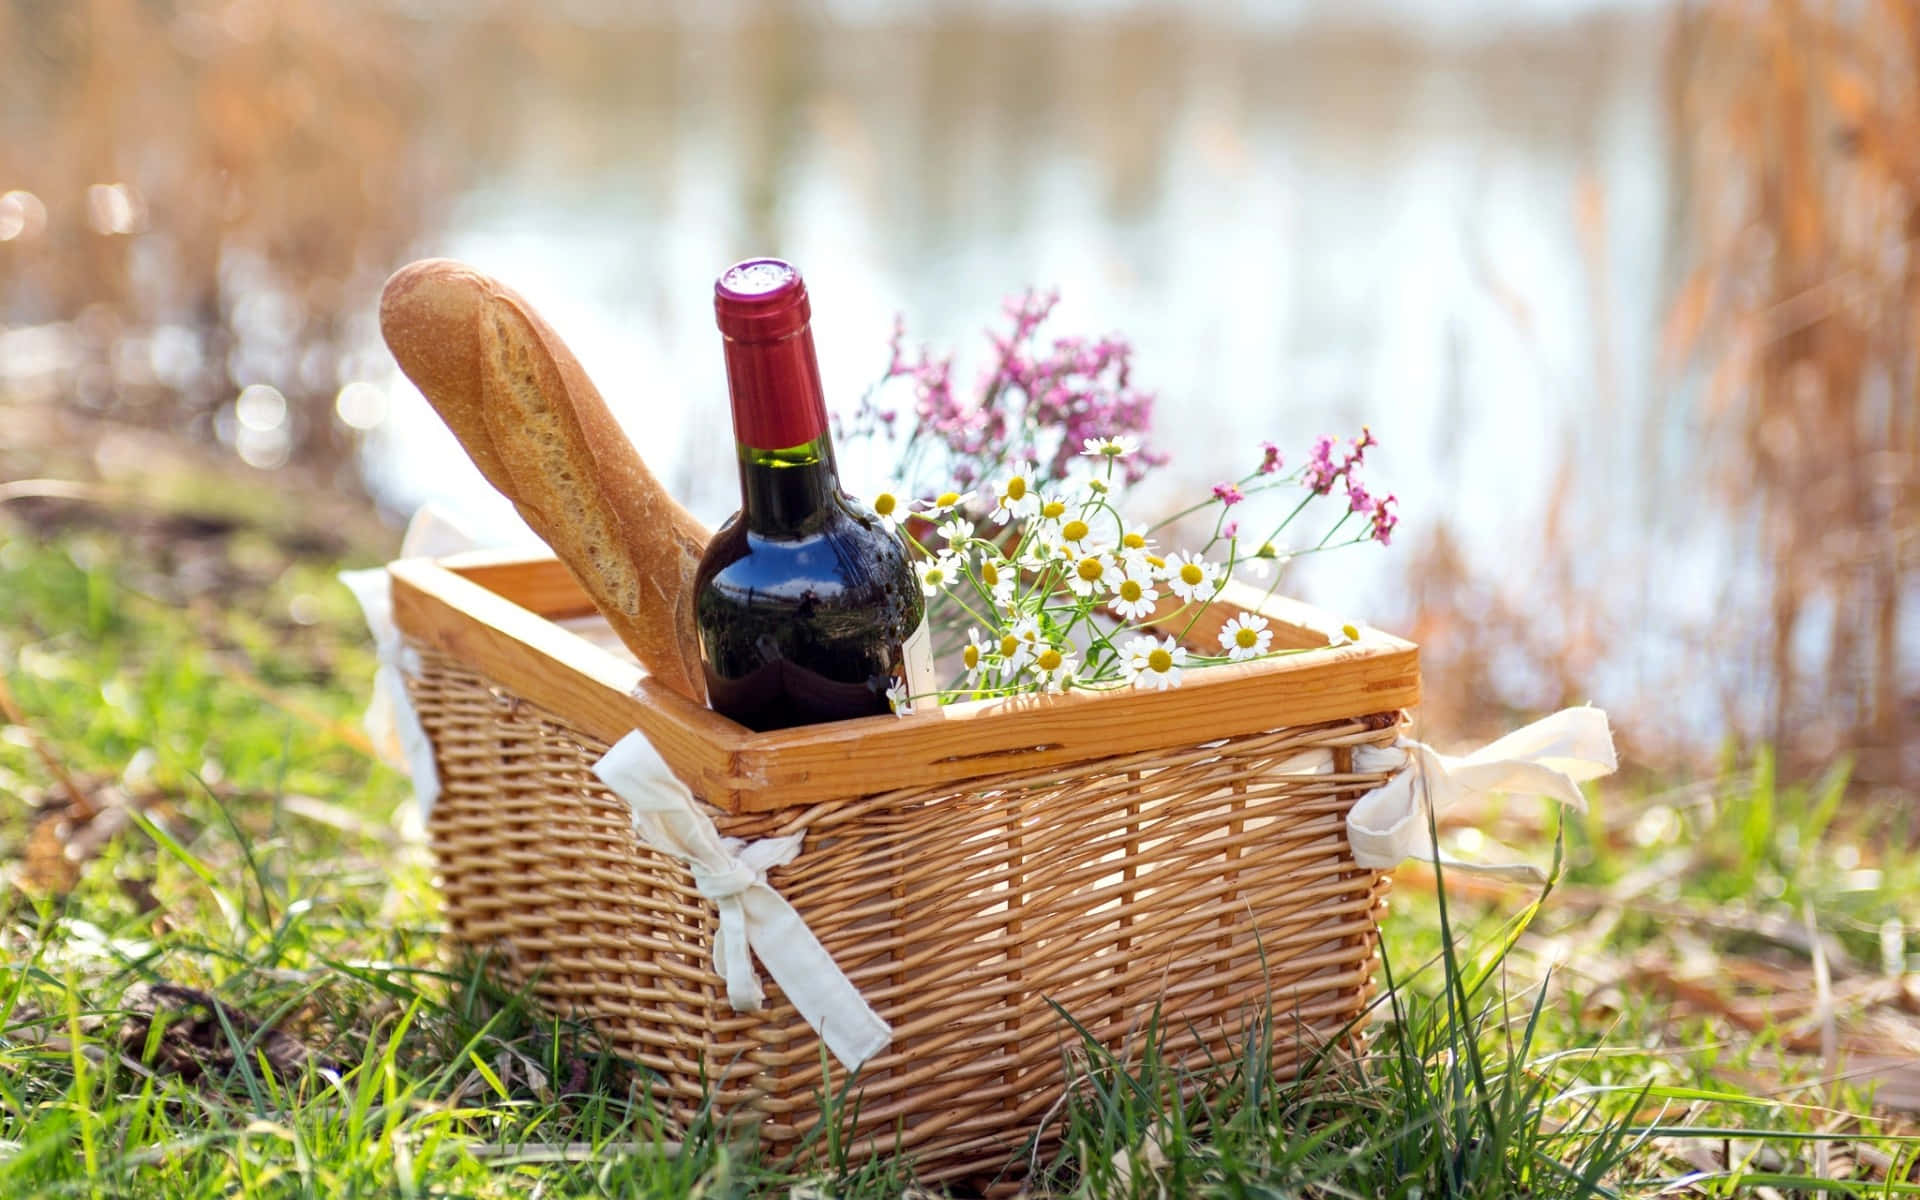 Picnic Basket With Wine&Flowers Wallpaper